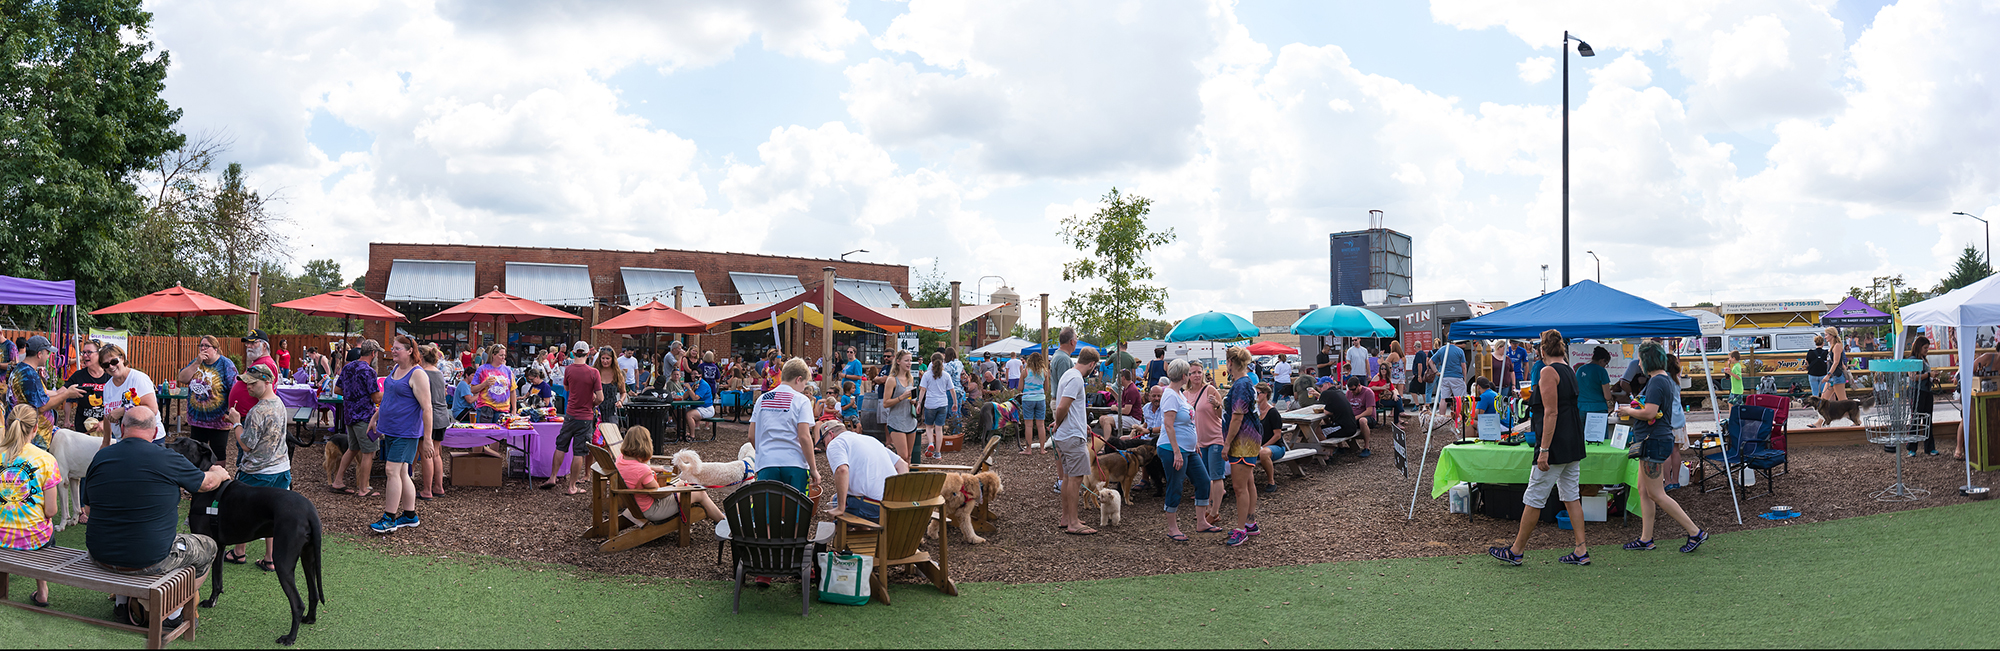 Woofstock 2019 at NoDa Brewing in Charlotte NC - Sept 21, 2019